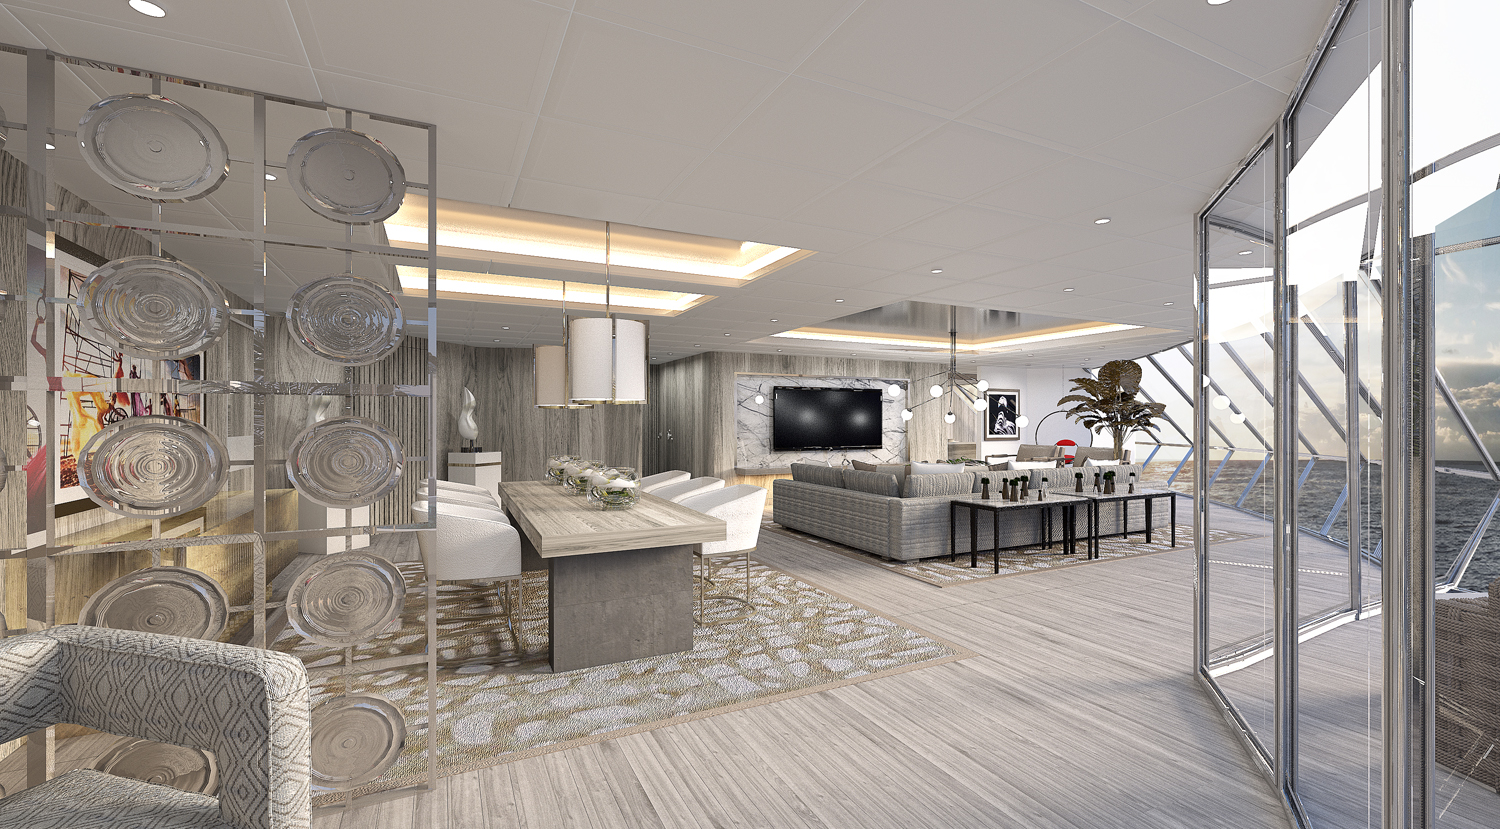 The Celebrity Edge will include the Iconic Suite, a new Edge-exclusive Suite Class category and the highest level of suites available on the ship.